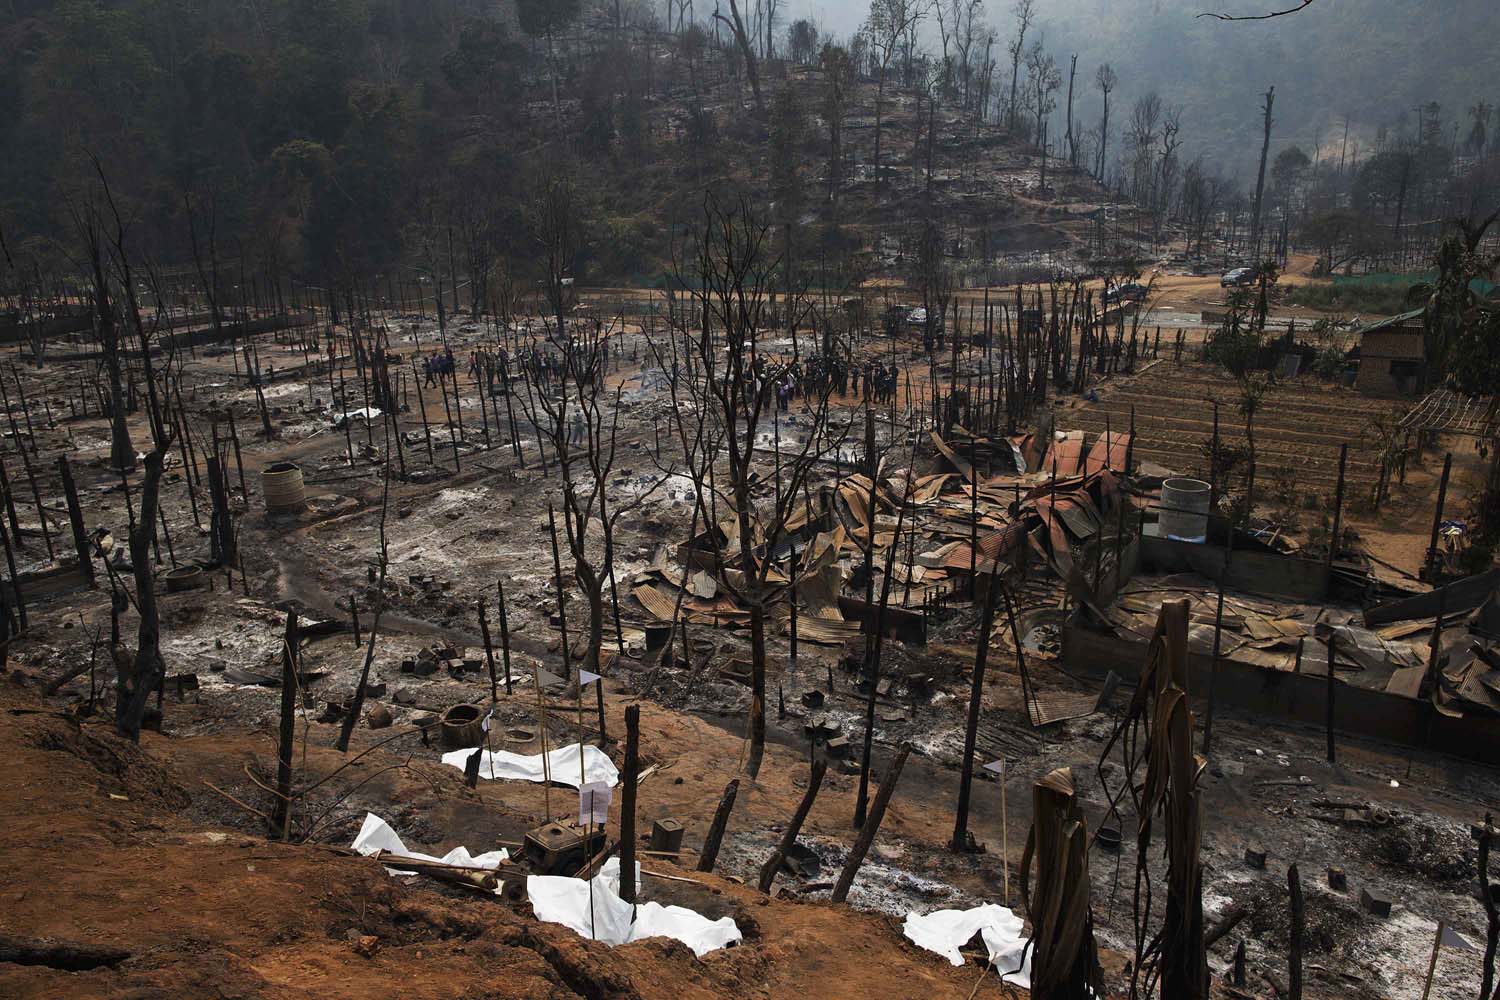 March 23, 2013. Body bags cover charred bodies of victims of a fire at the burnt Ban Mae Surin refugee camp near Mae Hong Son. At least 42 people have died in a fire at a camp which is home to thousands of refugees from Myanmar near the Thai-Myanmar border on Friday, local media reported.